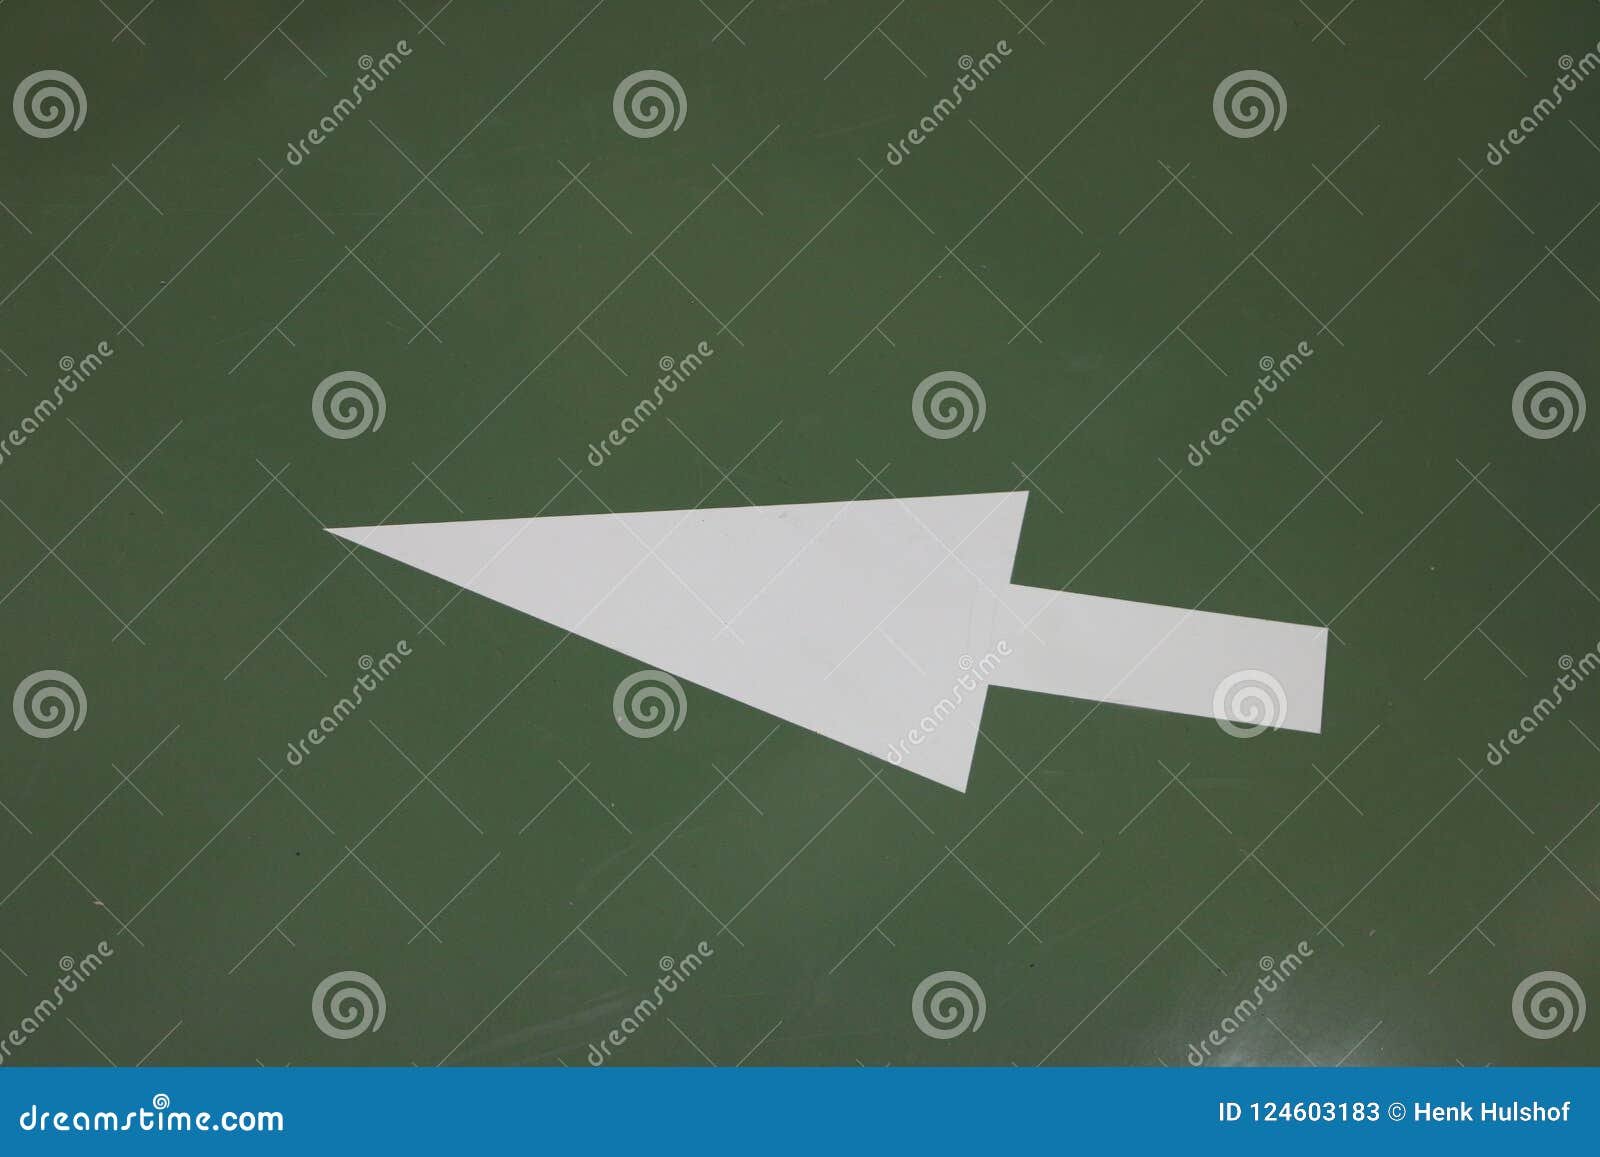 Safety Arrow And Symbol On The Floor Stock Image Image Of White